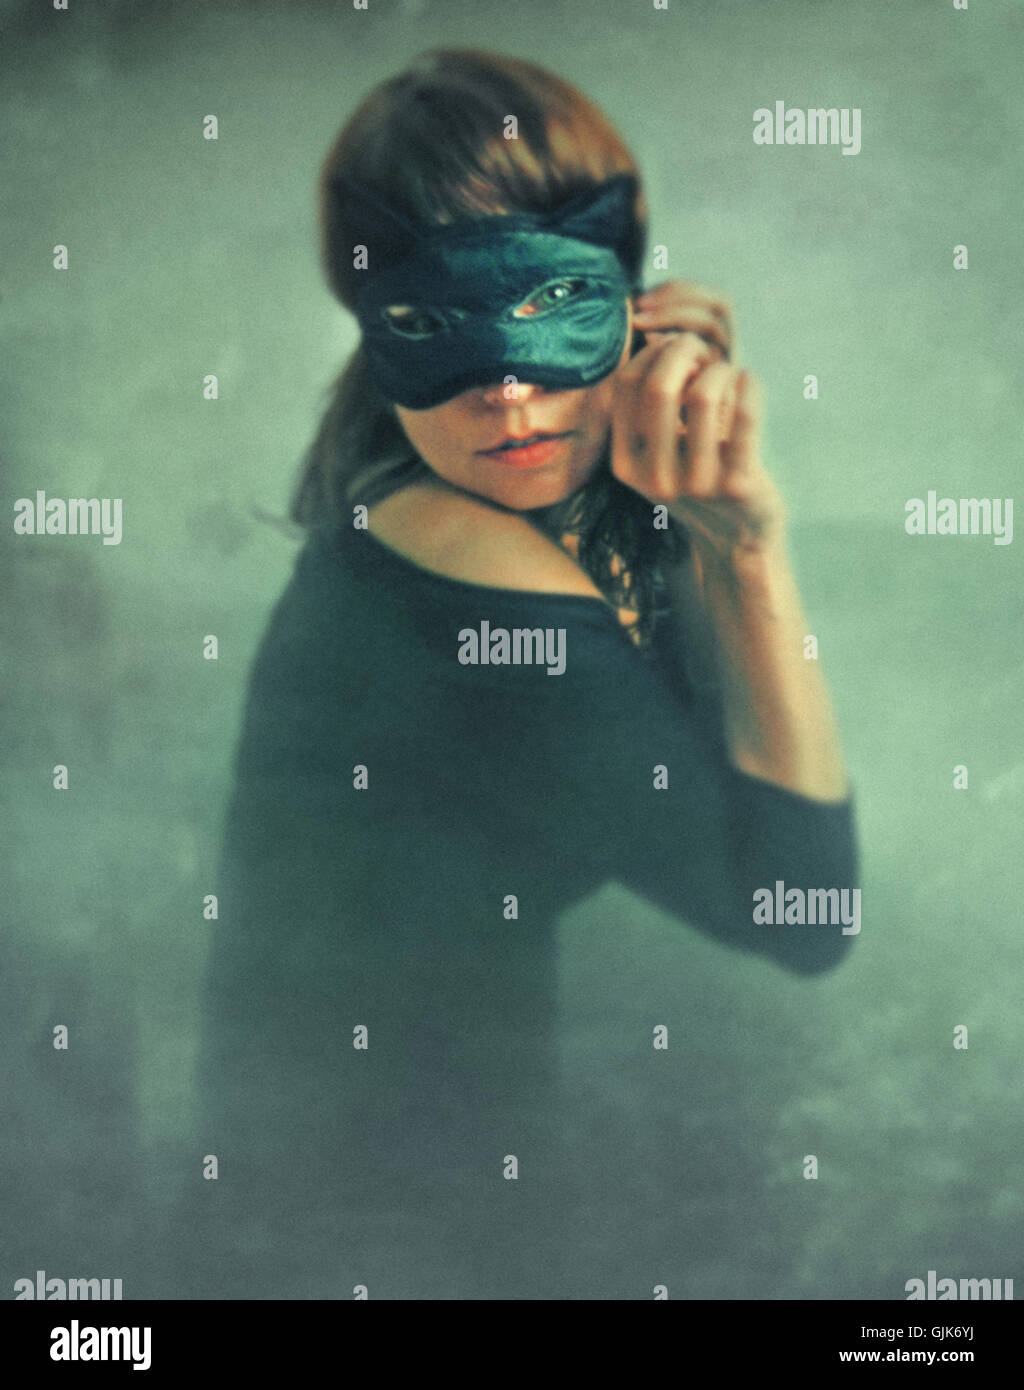 mysterious young woman wearing black cat mask on her face Stock Photo